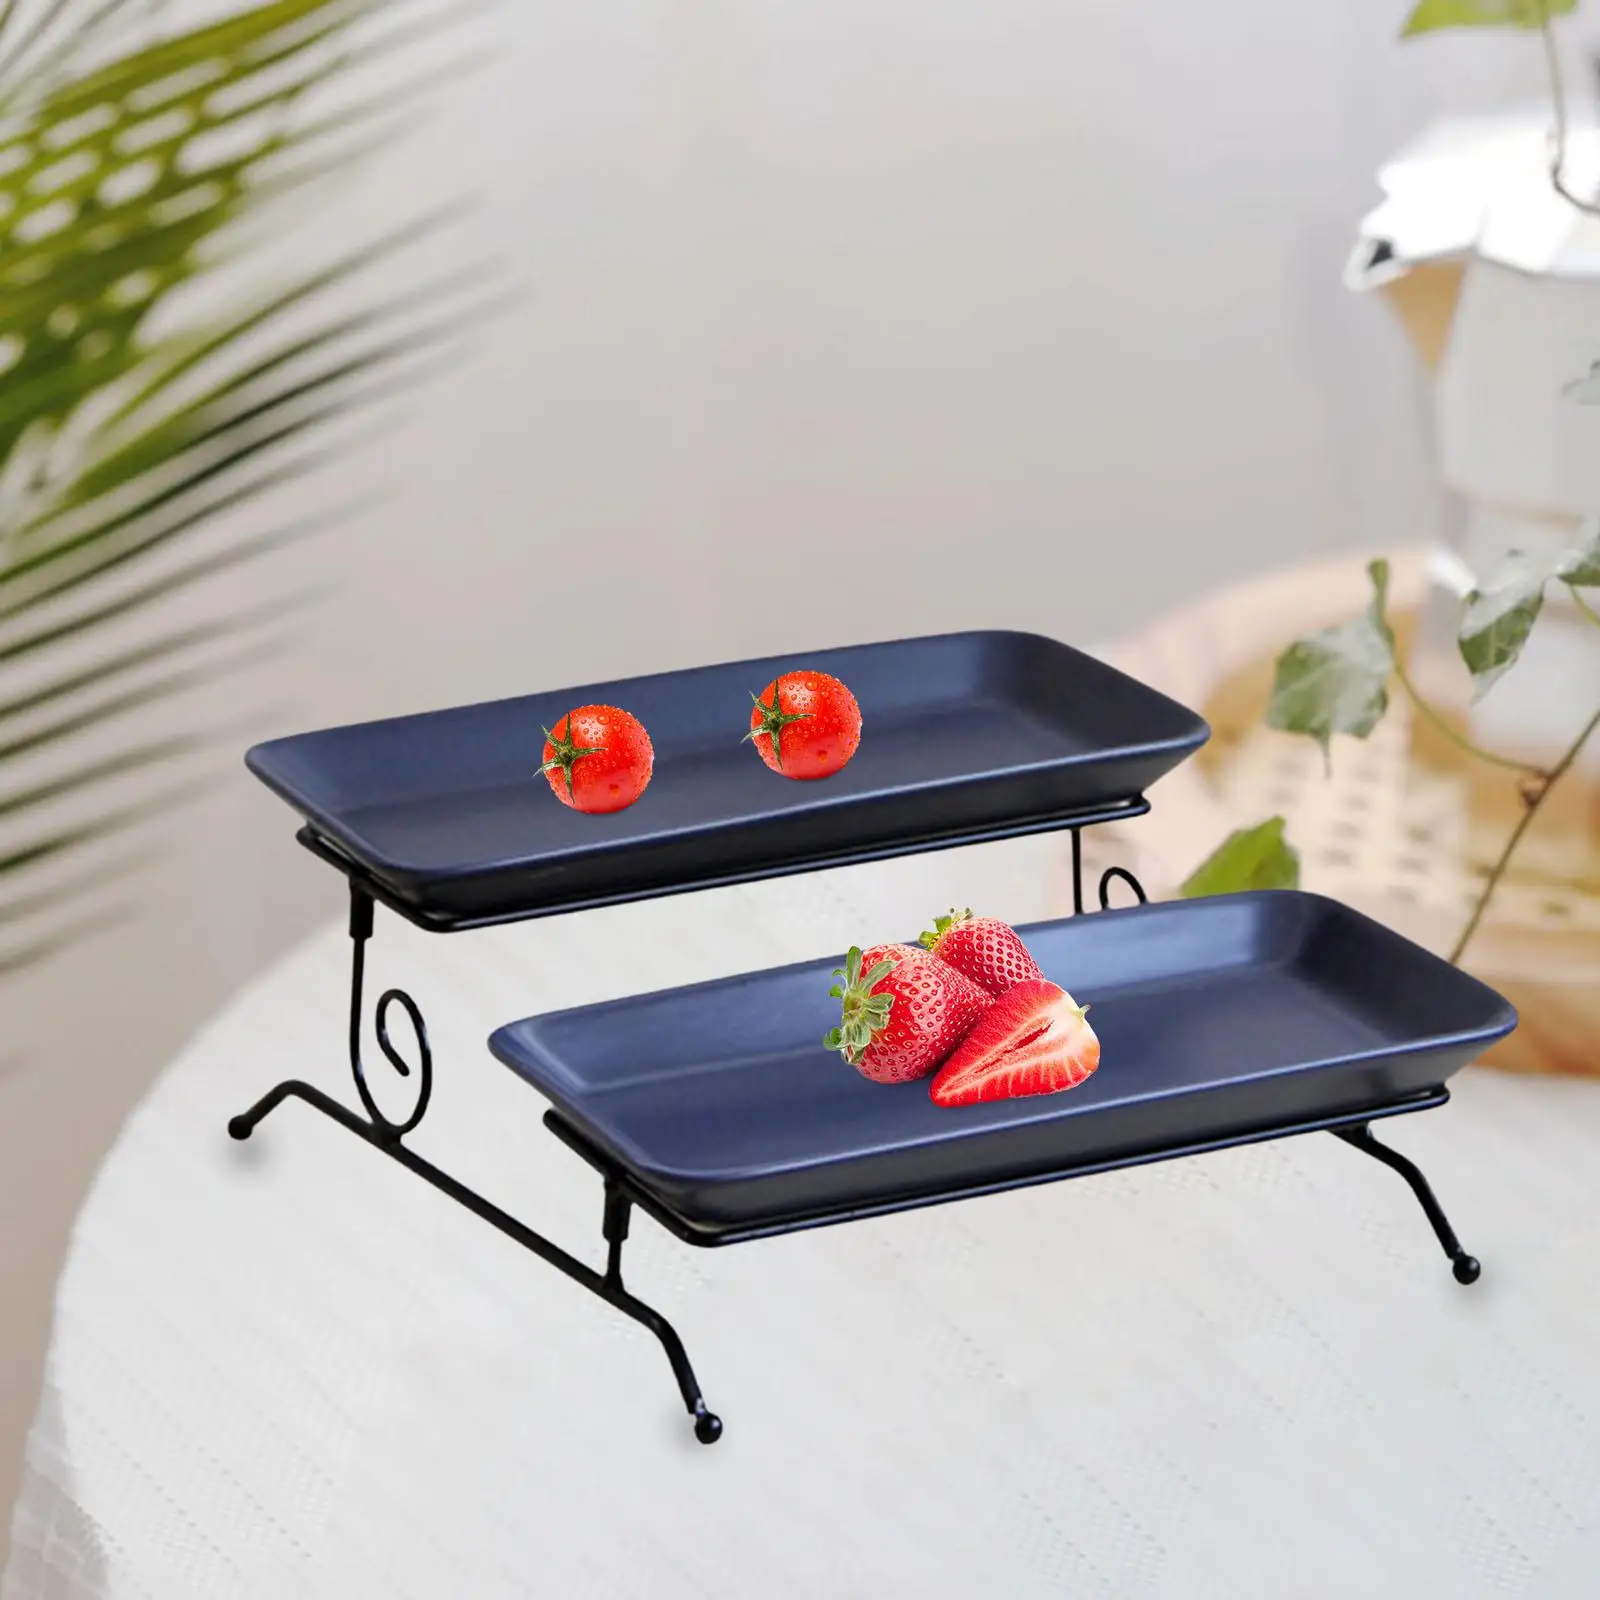 Reusable 2 Tier Serving Platter Cupcake Stand Detachable with Rack Dessert Serving Plate for Hotel Home Wedding Holiday Decor